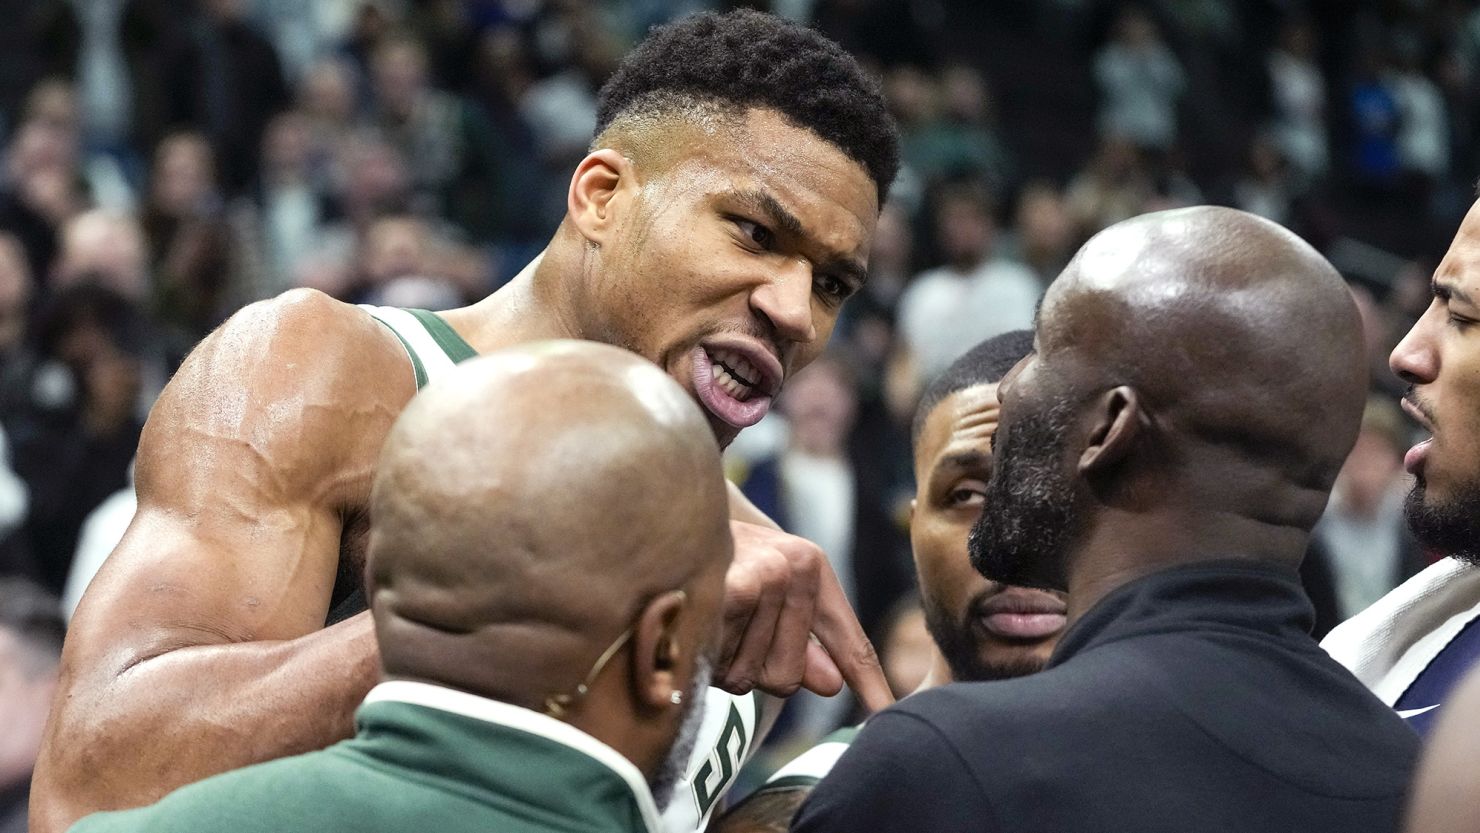 Giannis Antetokounmpo drops career-high 64 points as post-game scuffle mars Milwaukee  Bucks victory over the Indiana Pacers